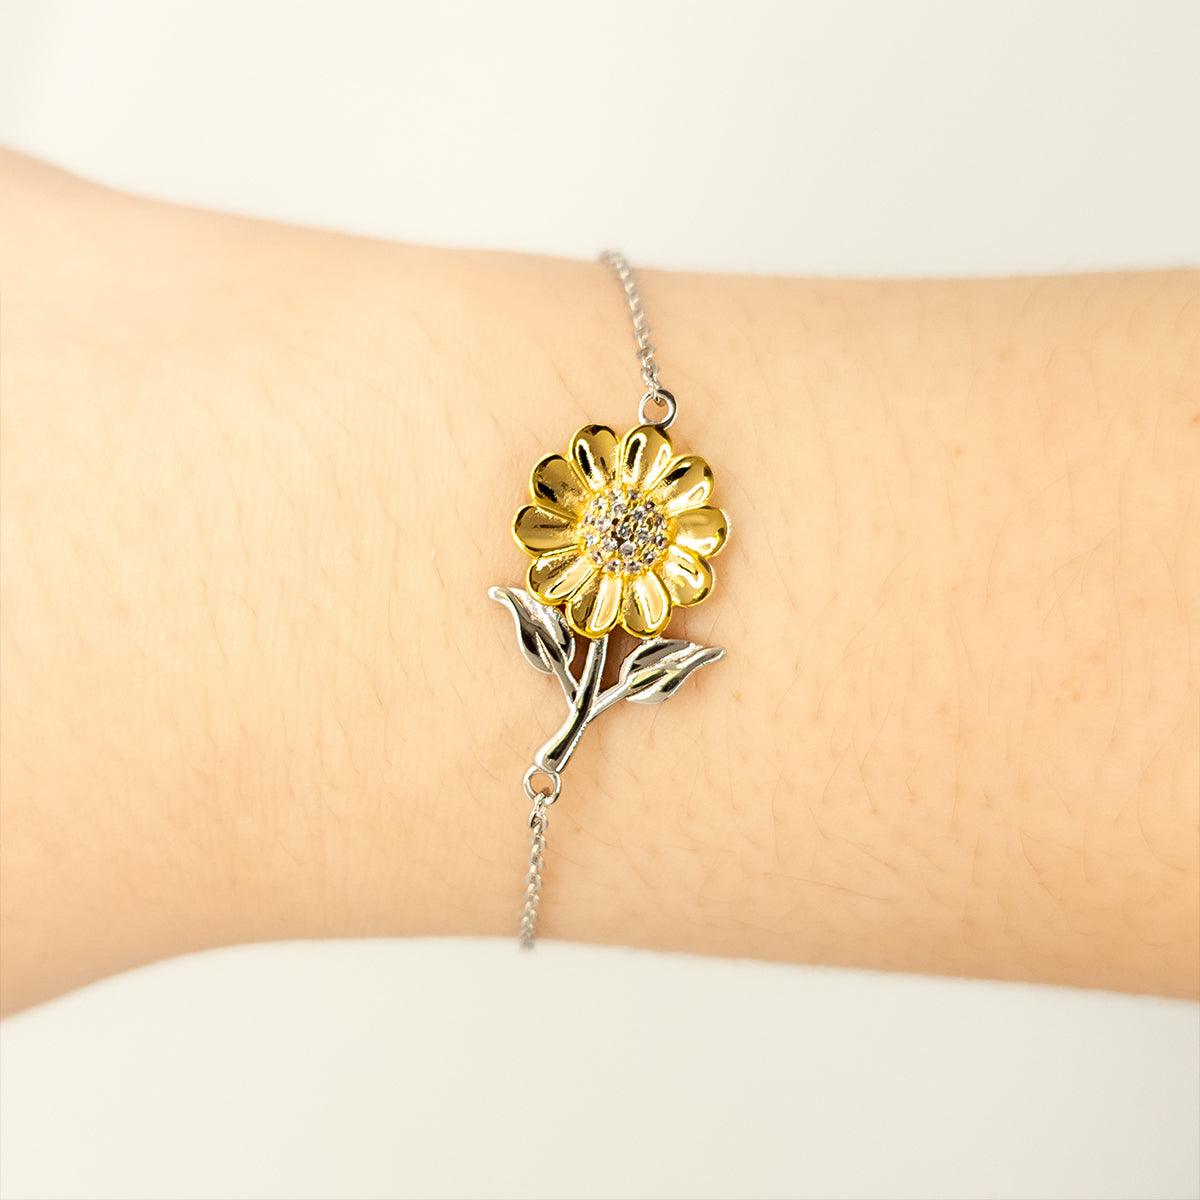 Inspirational Daughter-In-Law Sunflower Bracelet - Behind you, all your Memories, Before you, all your Dreams - Birthday, Christmas Gifts - Mallard Moon Gift Shop